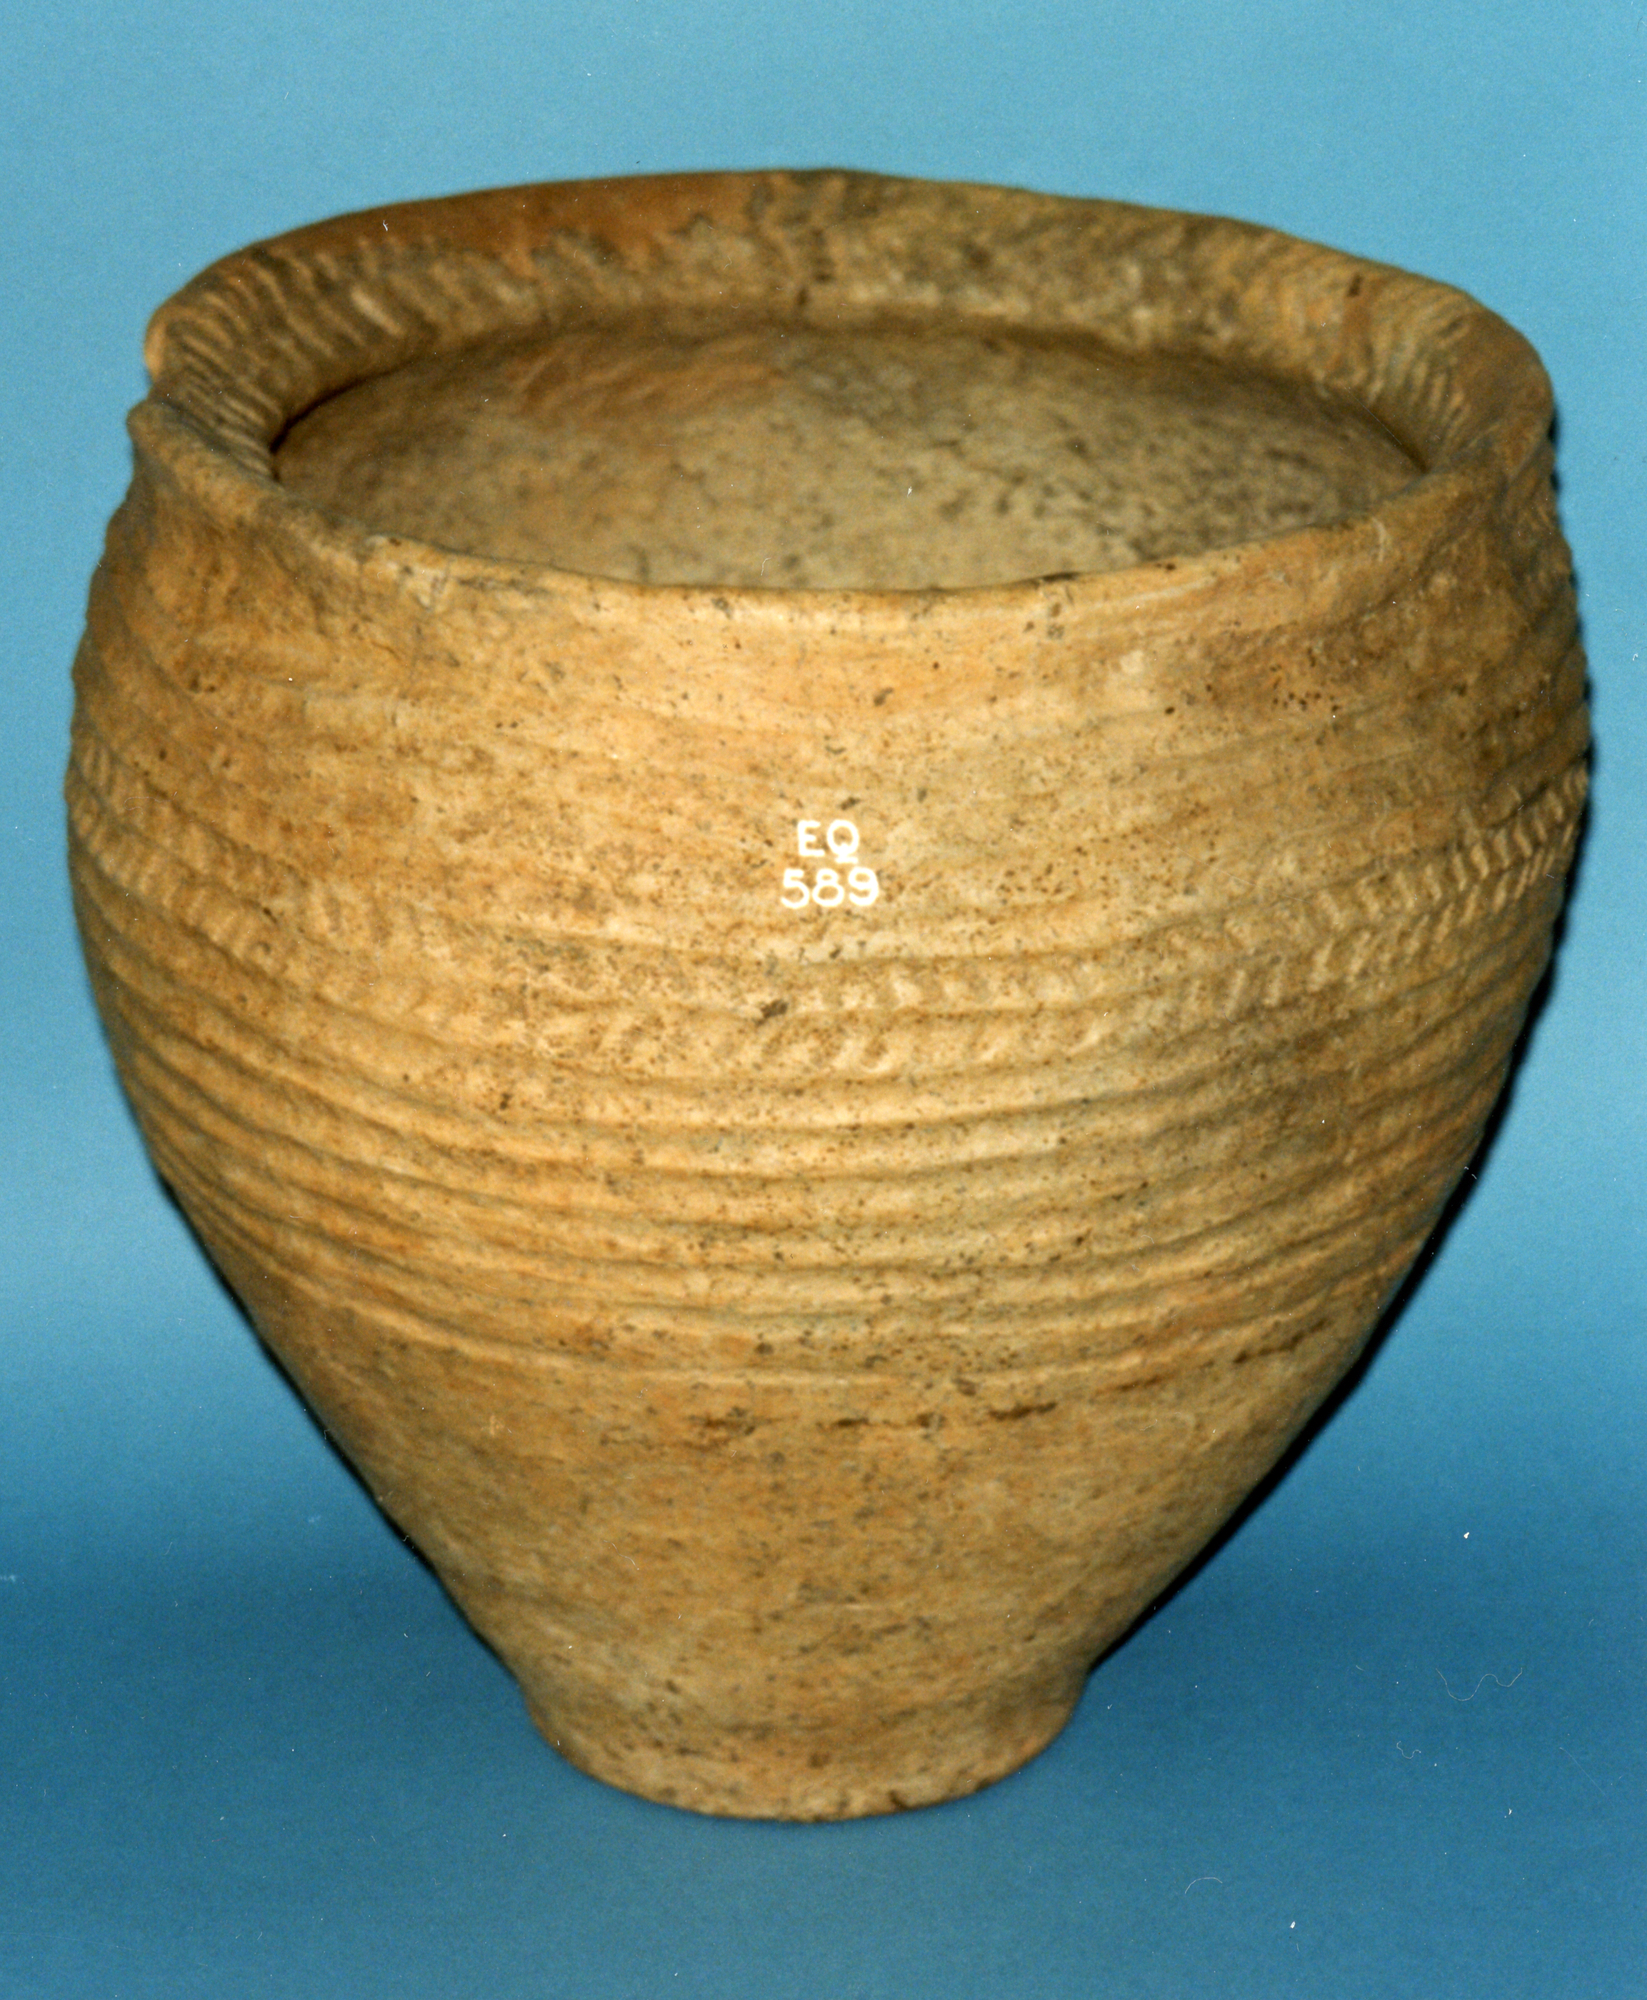 Image of Cinerary urn containing cleaned cremated bones, from Denbeath, Fife © National Museums Scotland